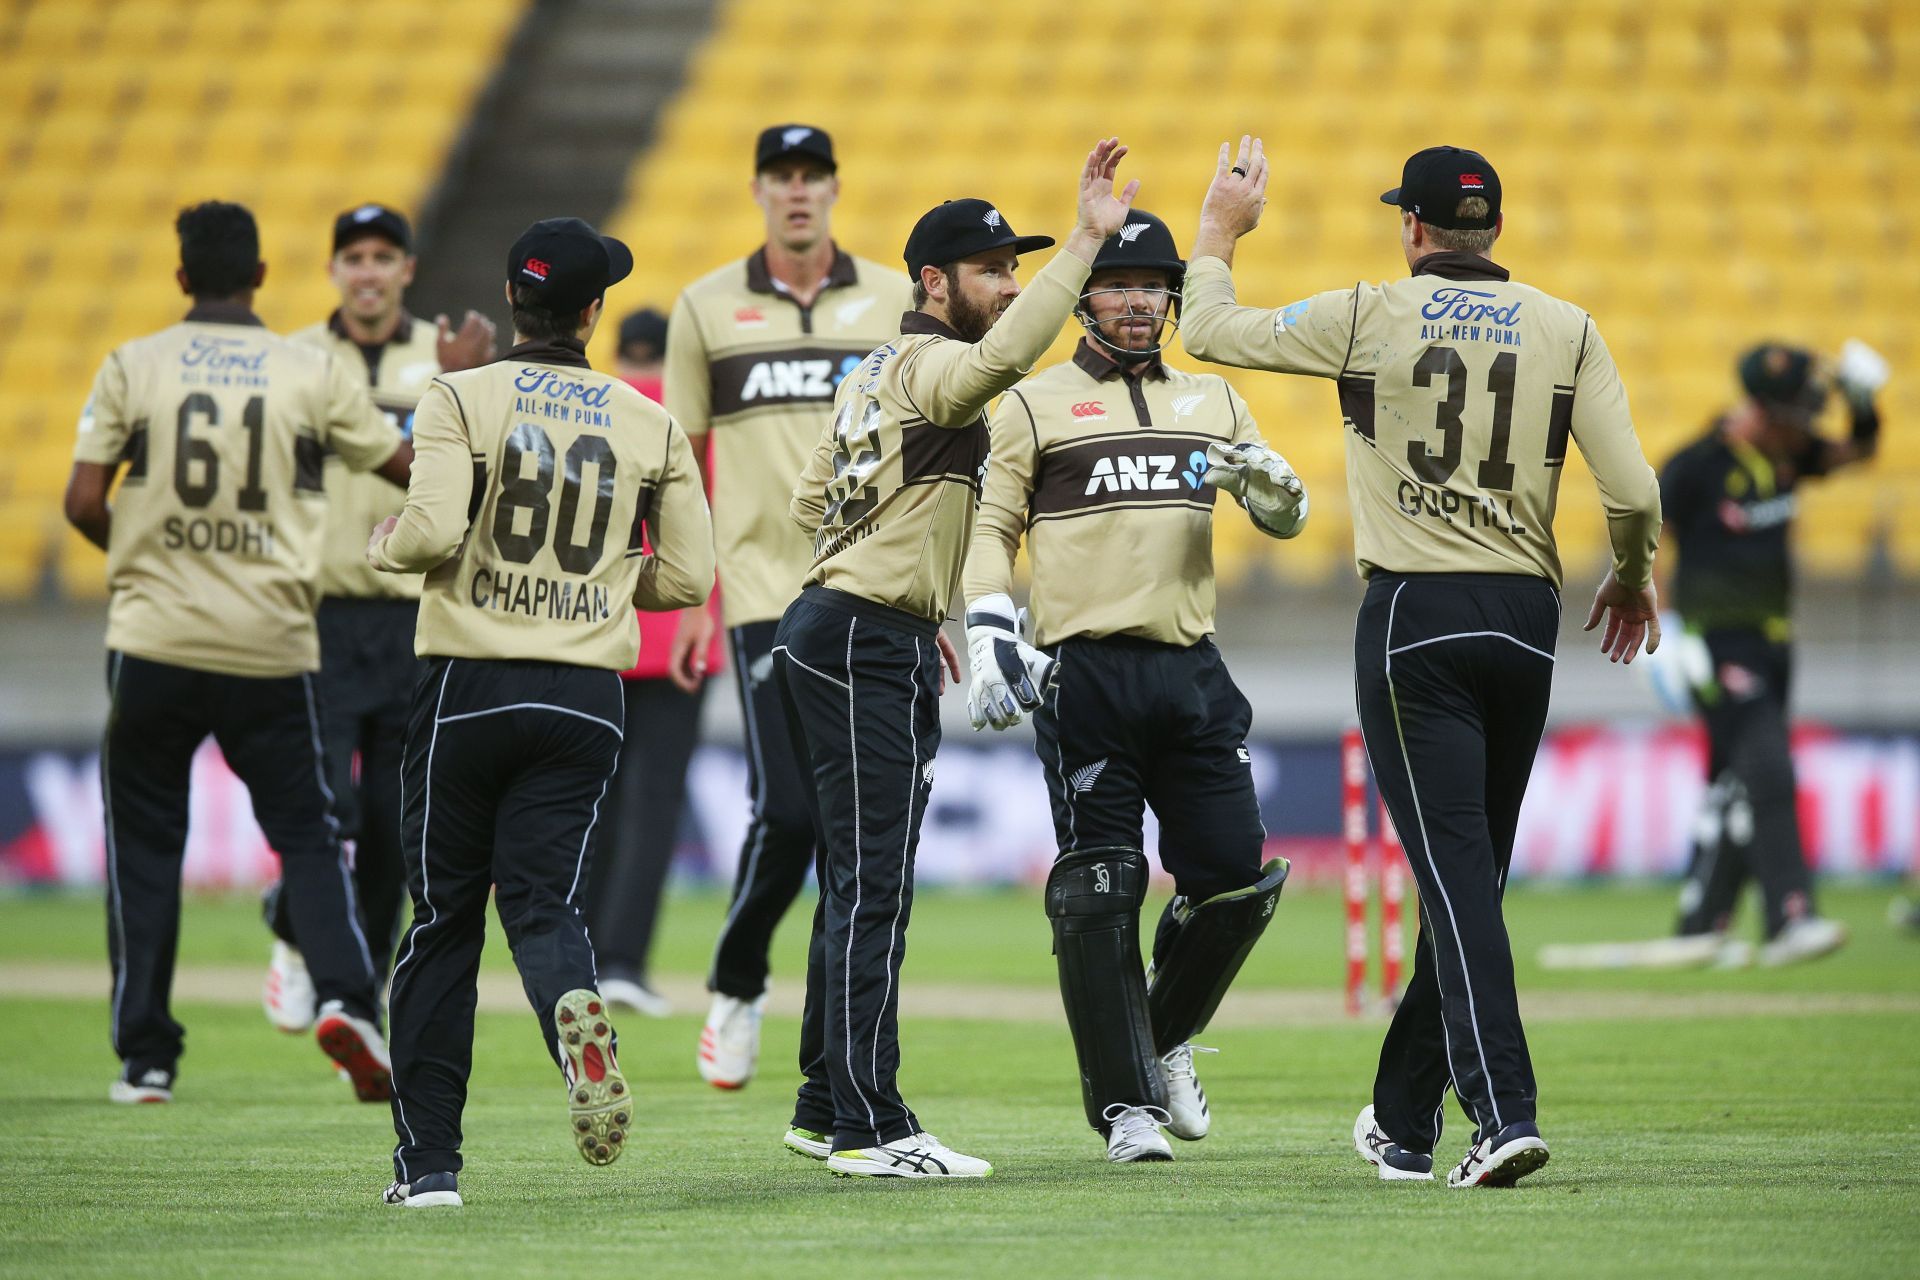 New Zealand cricket team. (Image source: Getty)